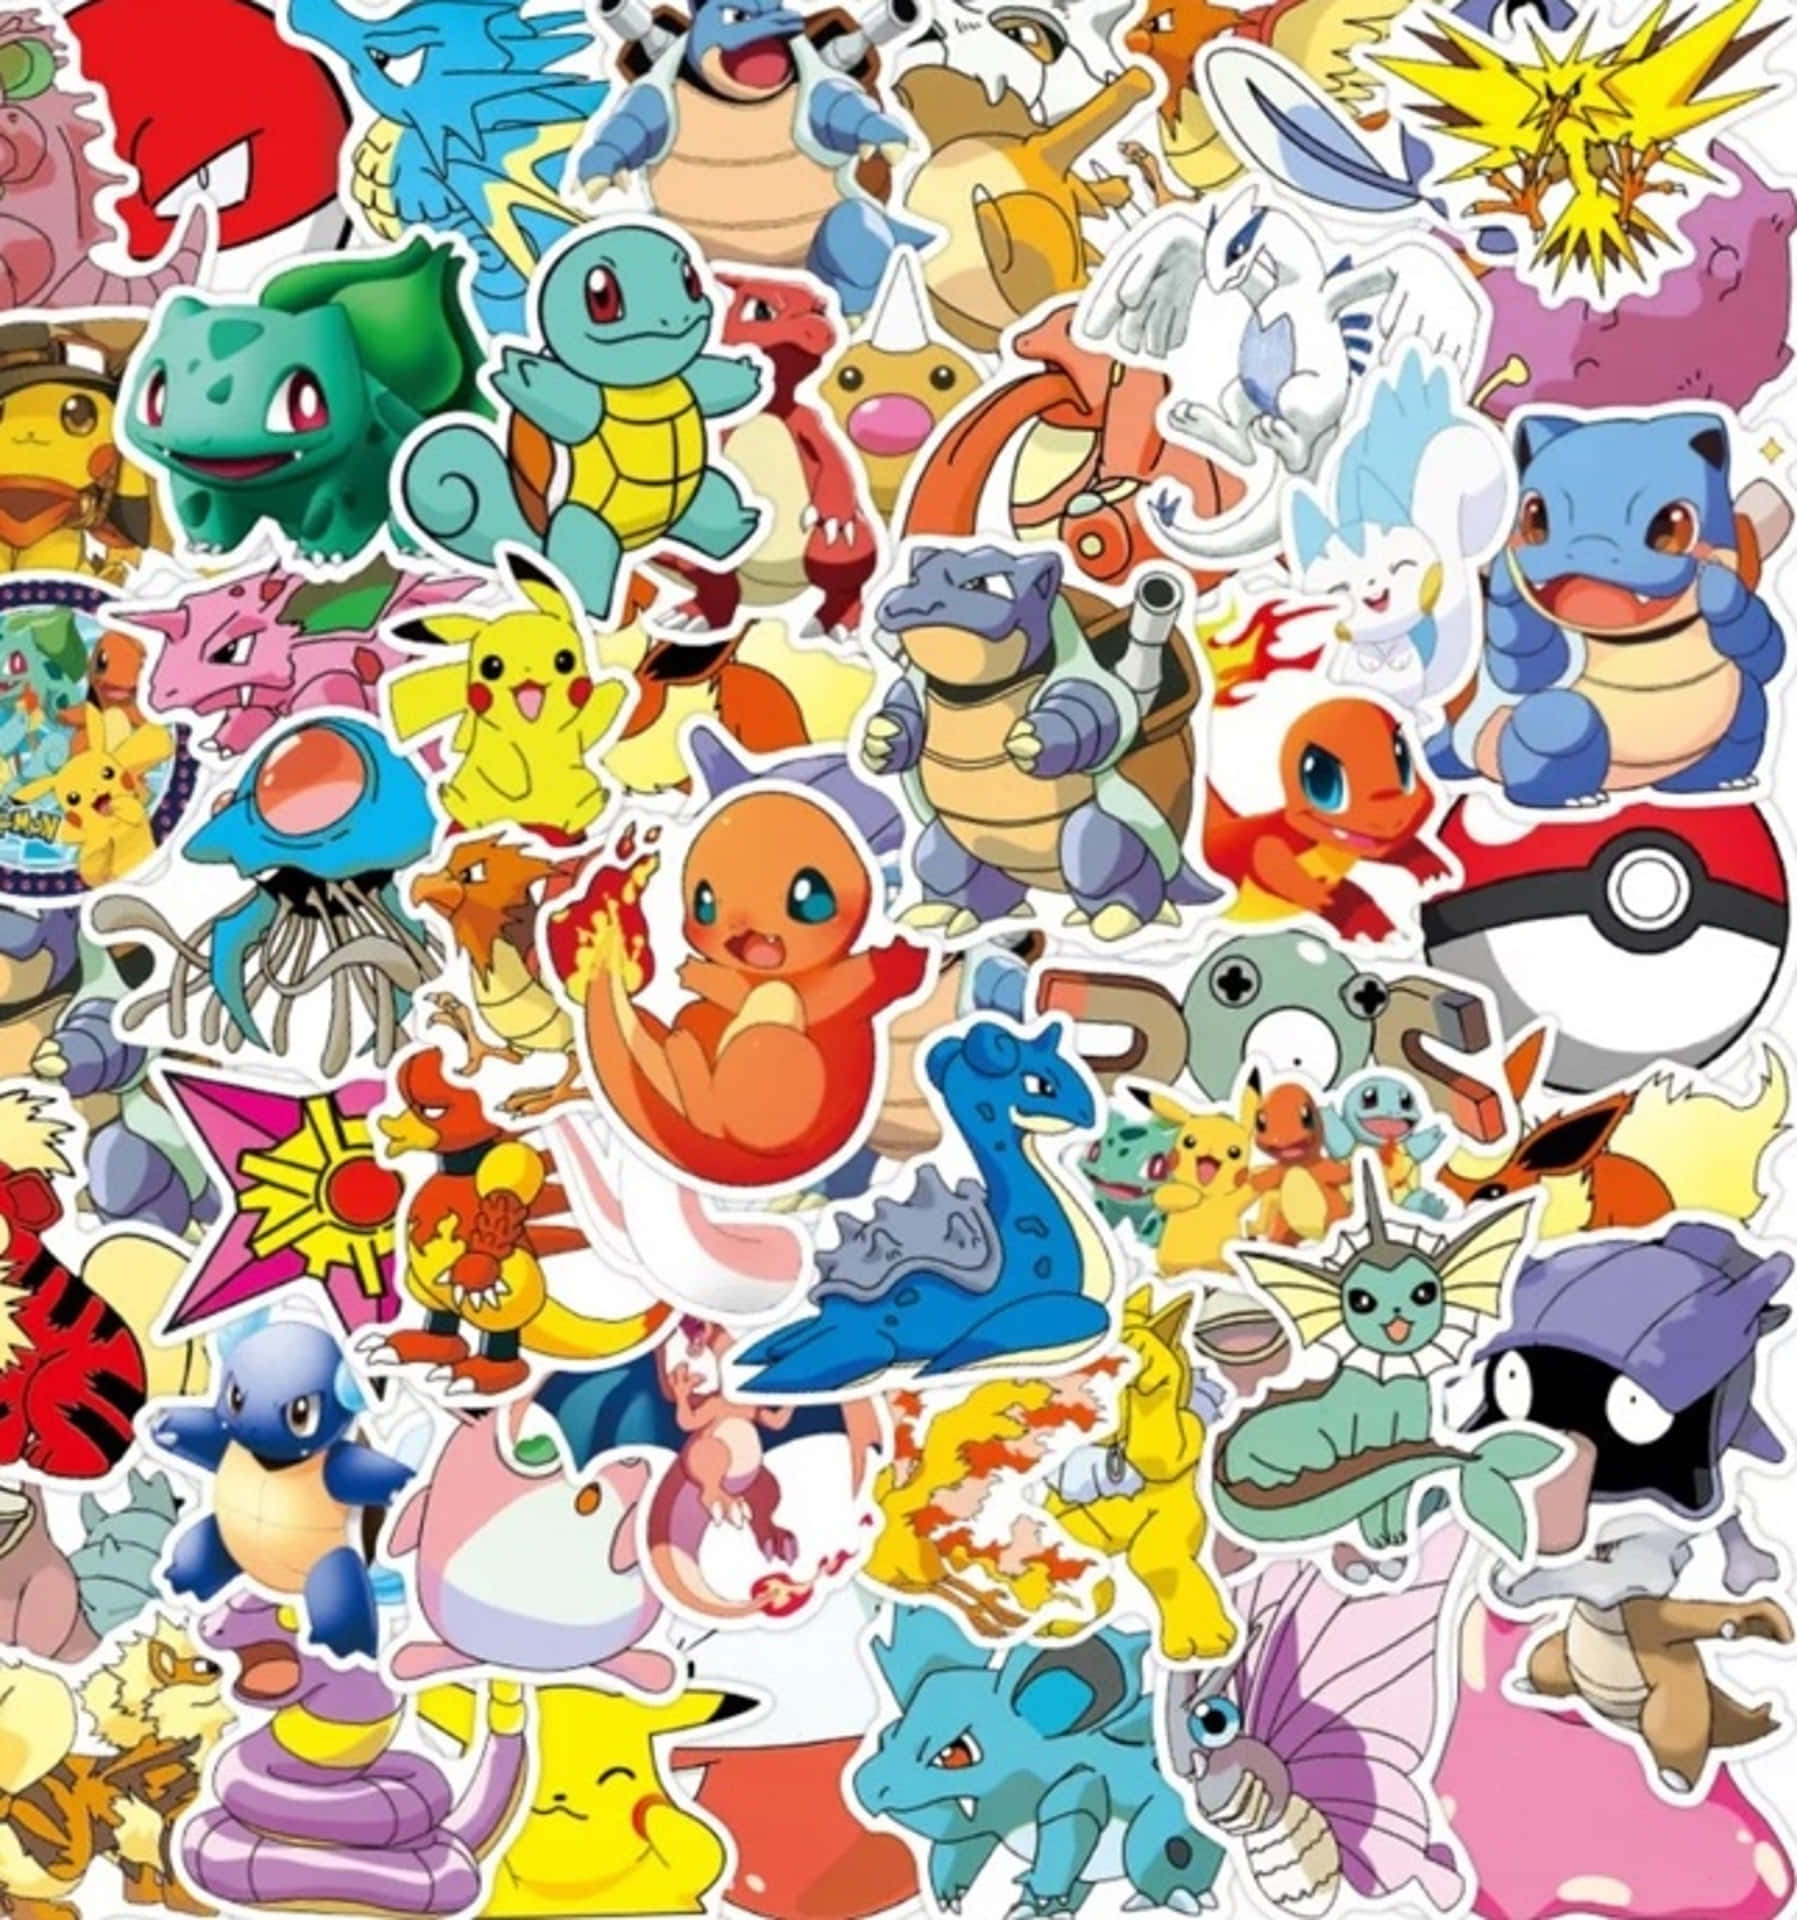 Catch 'Em All with this Amazing Pokémon Sticker Collection! Wallpaper